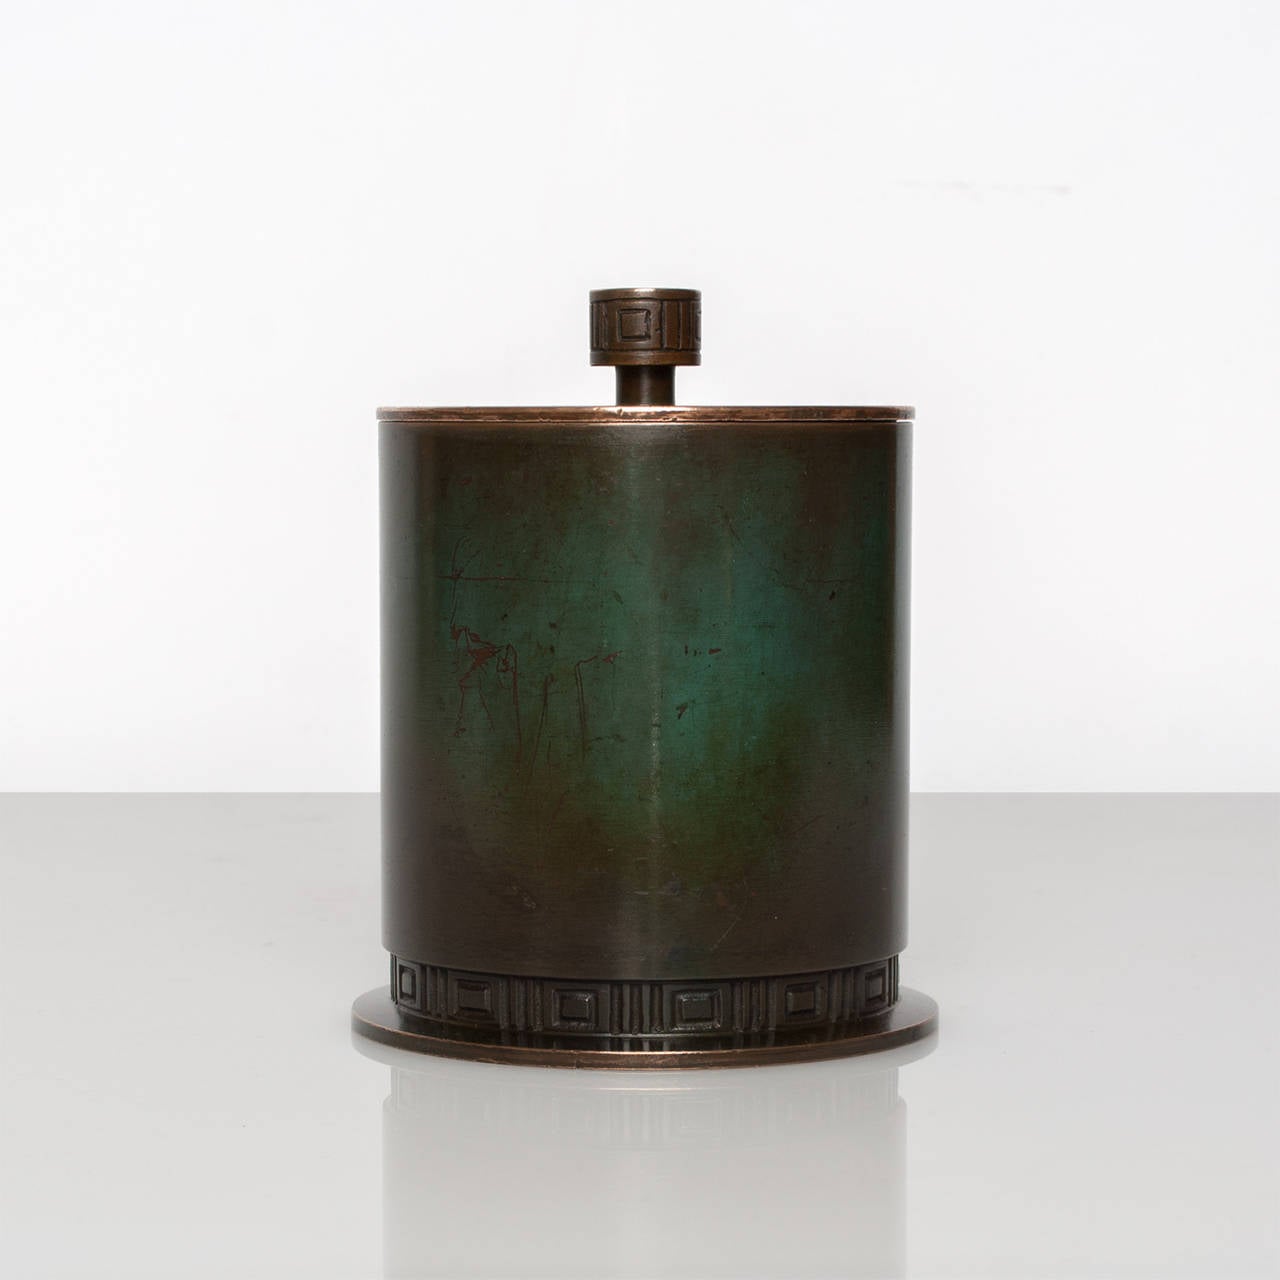 Swedish art deco bronze tobacco jar with lid. Hand cast at Guldsmedsaktiebolaget, GAB and patinated with a deep to medium green. The jar's column form is sparsely decorated with a meander motif at the base and the lid's pull. The inside of the jar